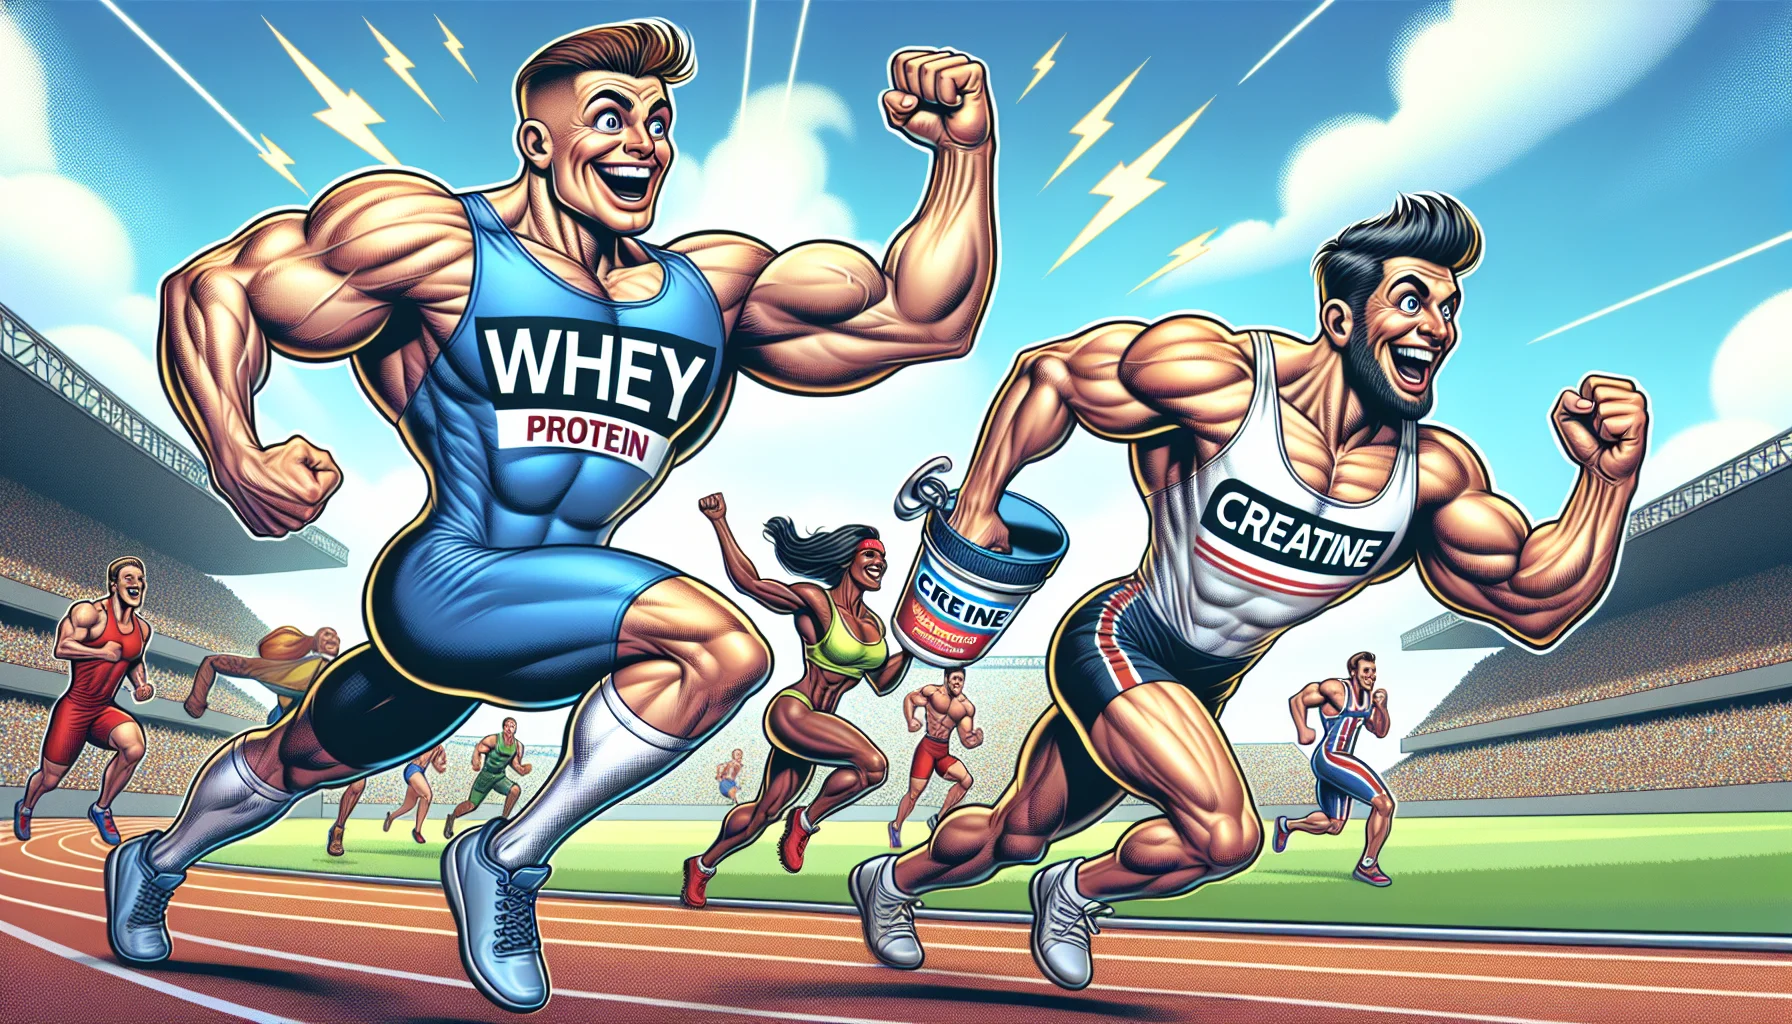 Generate a humorous and vibrant image showcasing whey protein and creatine. Picture them as lively, personified characters enjoying a competitive sports scene. The whey protein character, a strapping male with Caucasian descent in a running suit, is sprinting enthusiastically towards the finish line. The creatine character, a muscled female with Hispanic descent in a weightlifting outfit, is astonishing other characters with her strength and grit. They are both clearly excited about their athletic prowess. Their positive and funny personas are inspiring others, enticing them to consider the benefits of sports supplements.